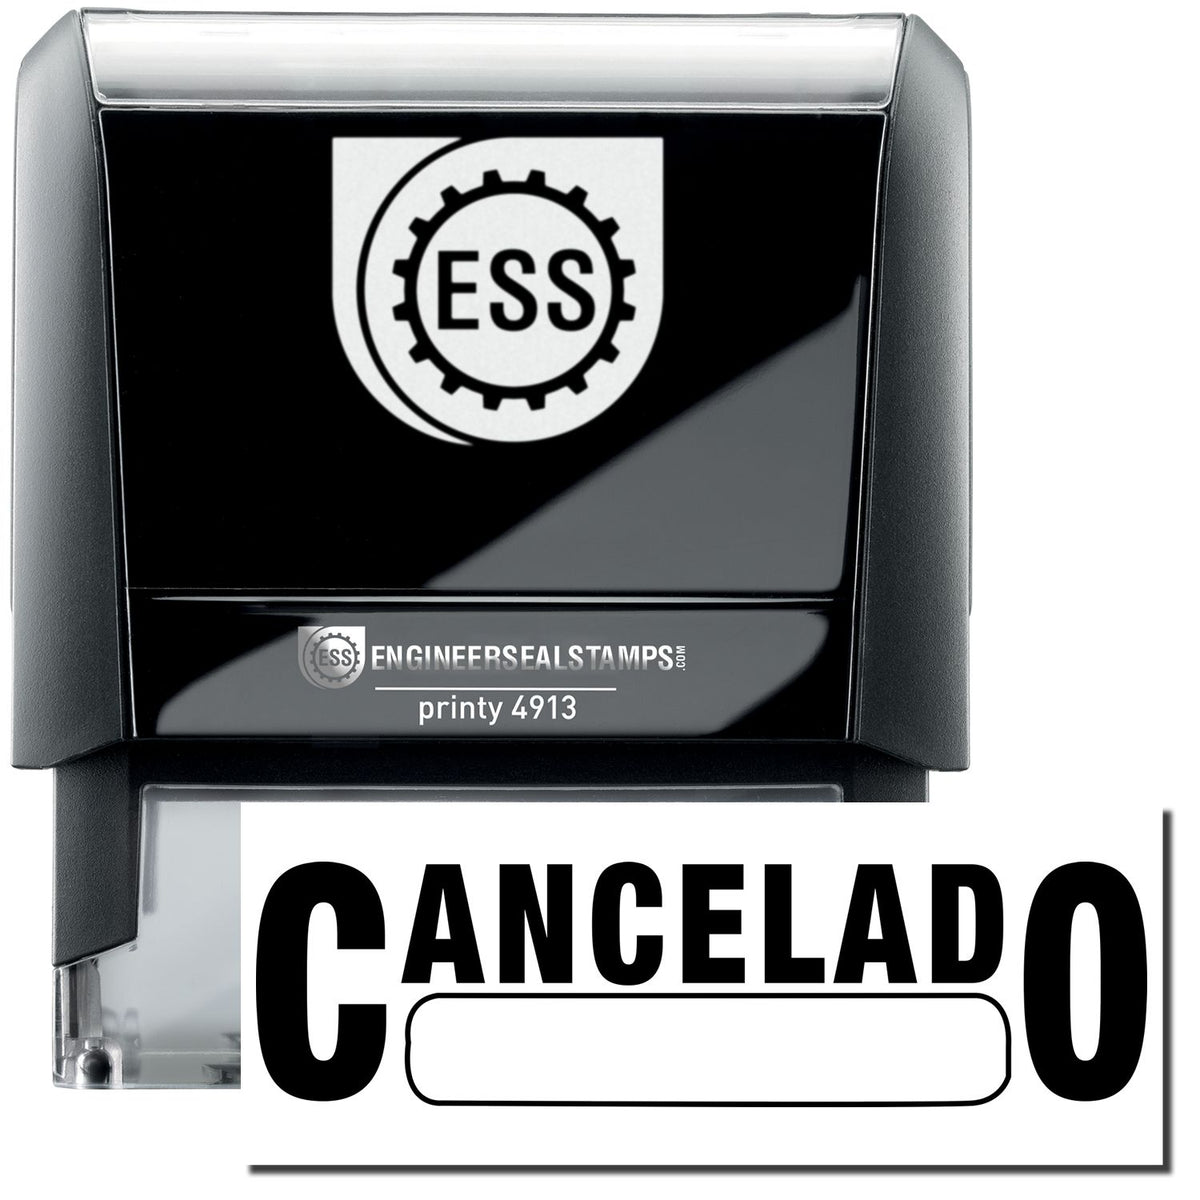 A self-inking stamp with a stamped image showing how the text &quot;CANCELADO&quot; (with a box underneath) in a large font is displayed by it after stamping.